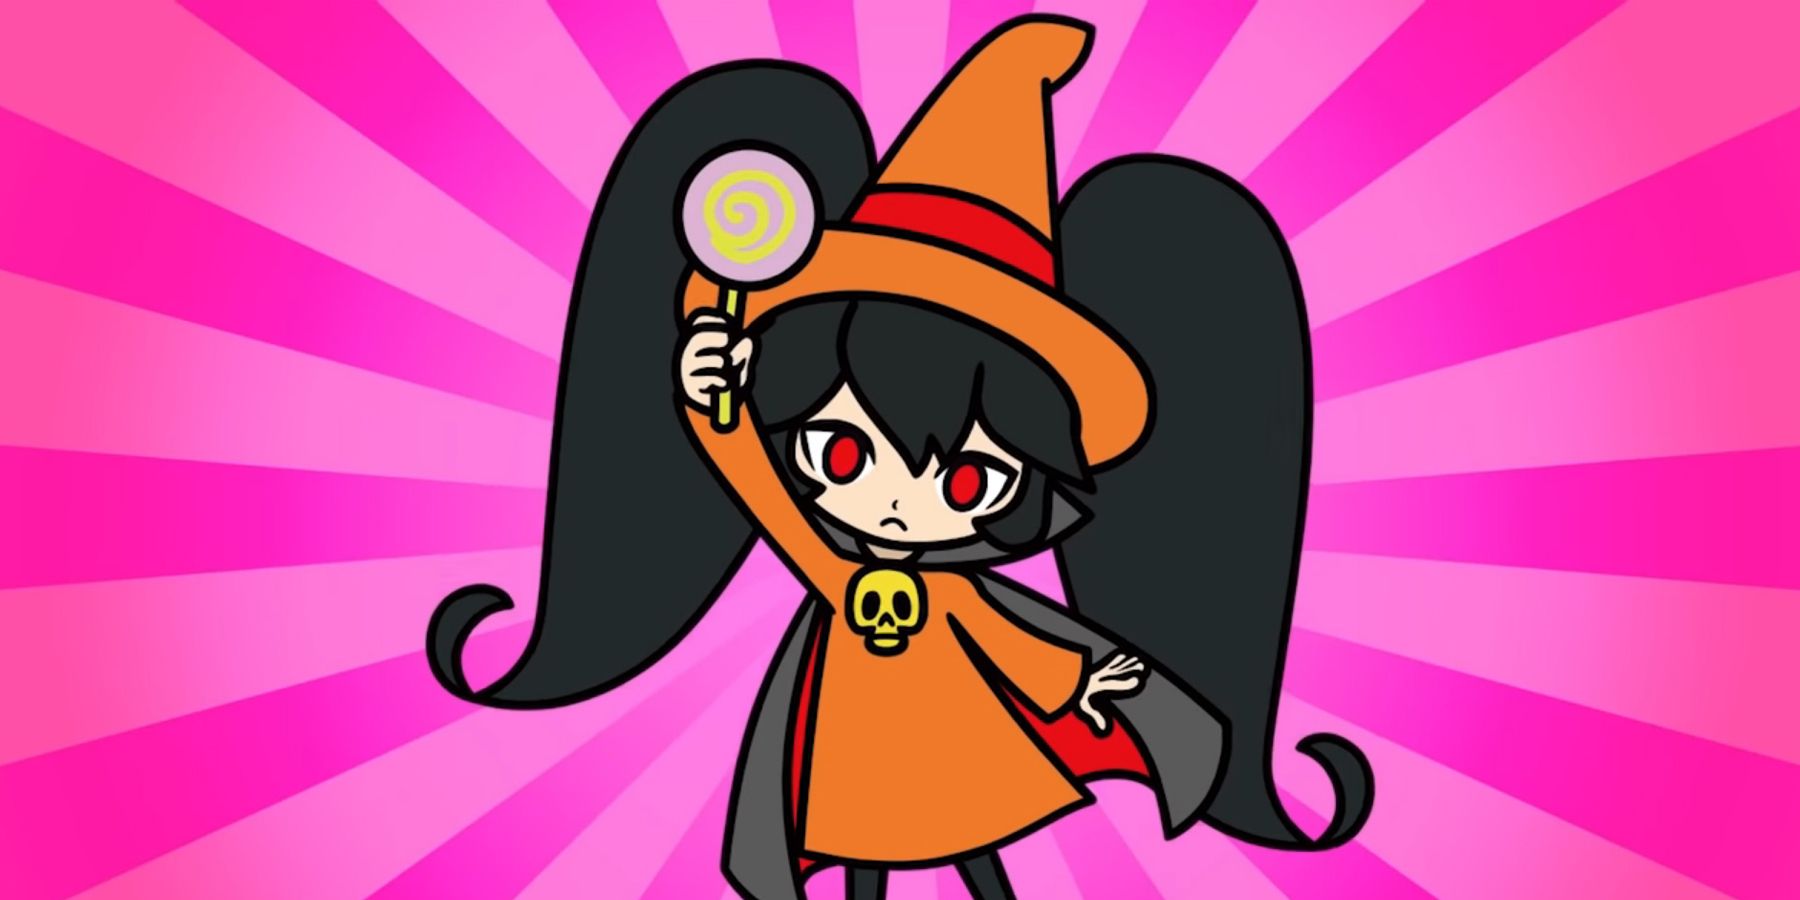 Ashley from WarioWare Gold dresses up in a Halloween costume and raises a lollipop above her head.